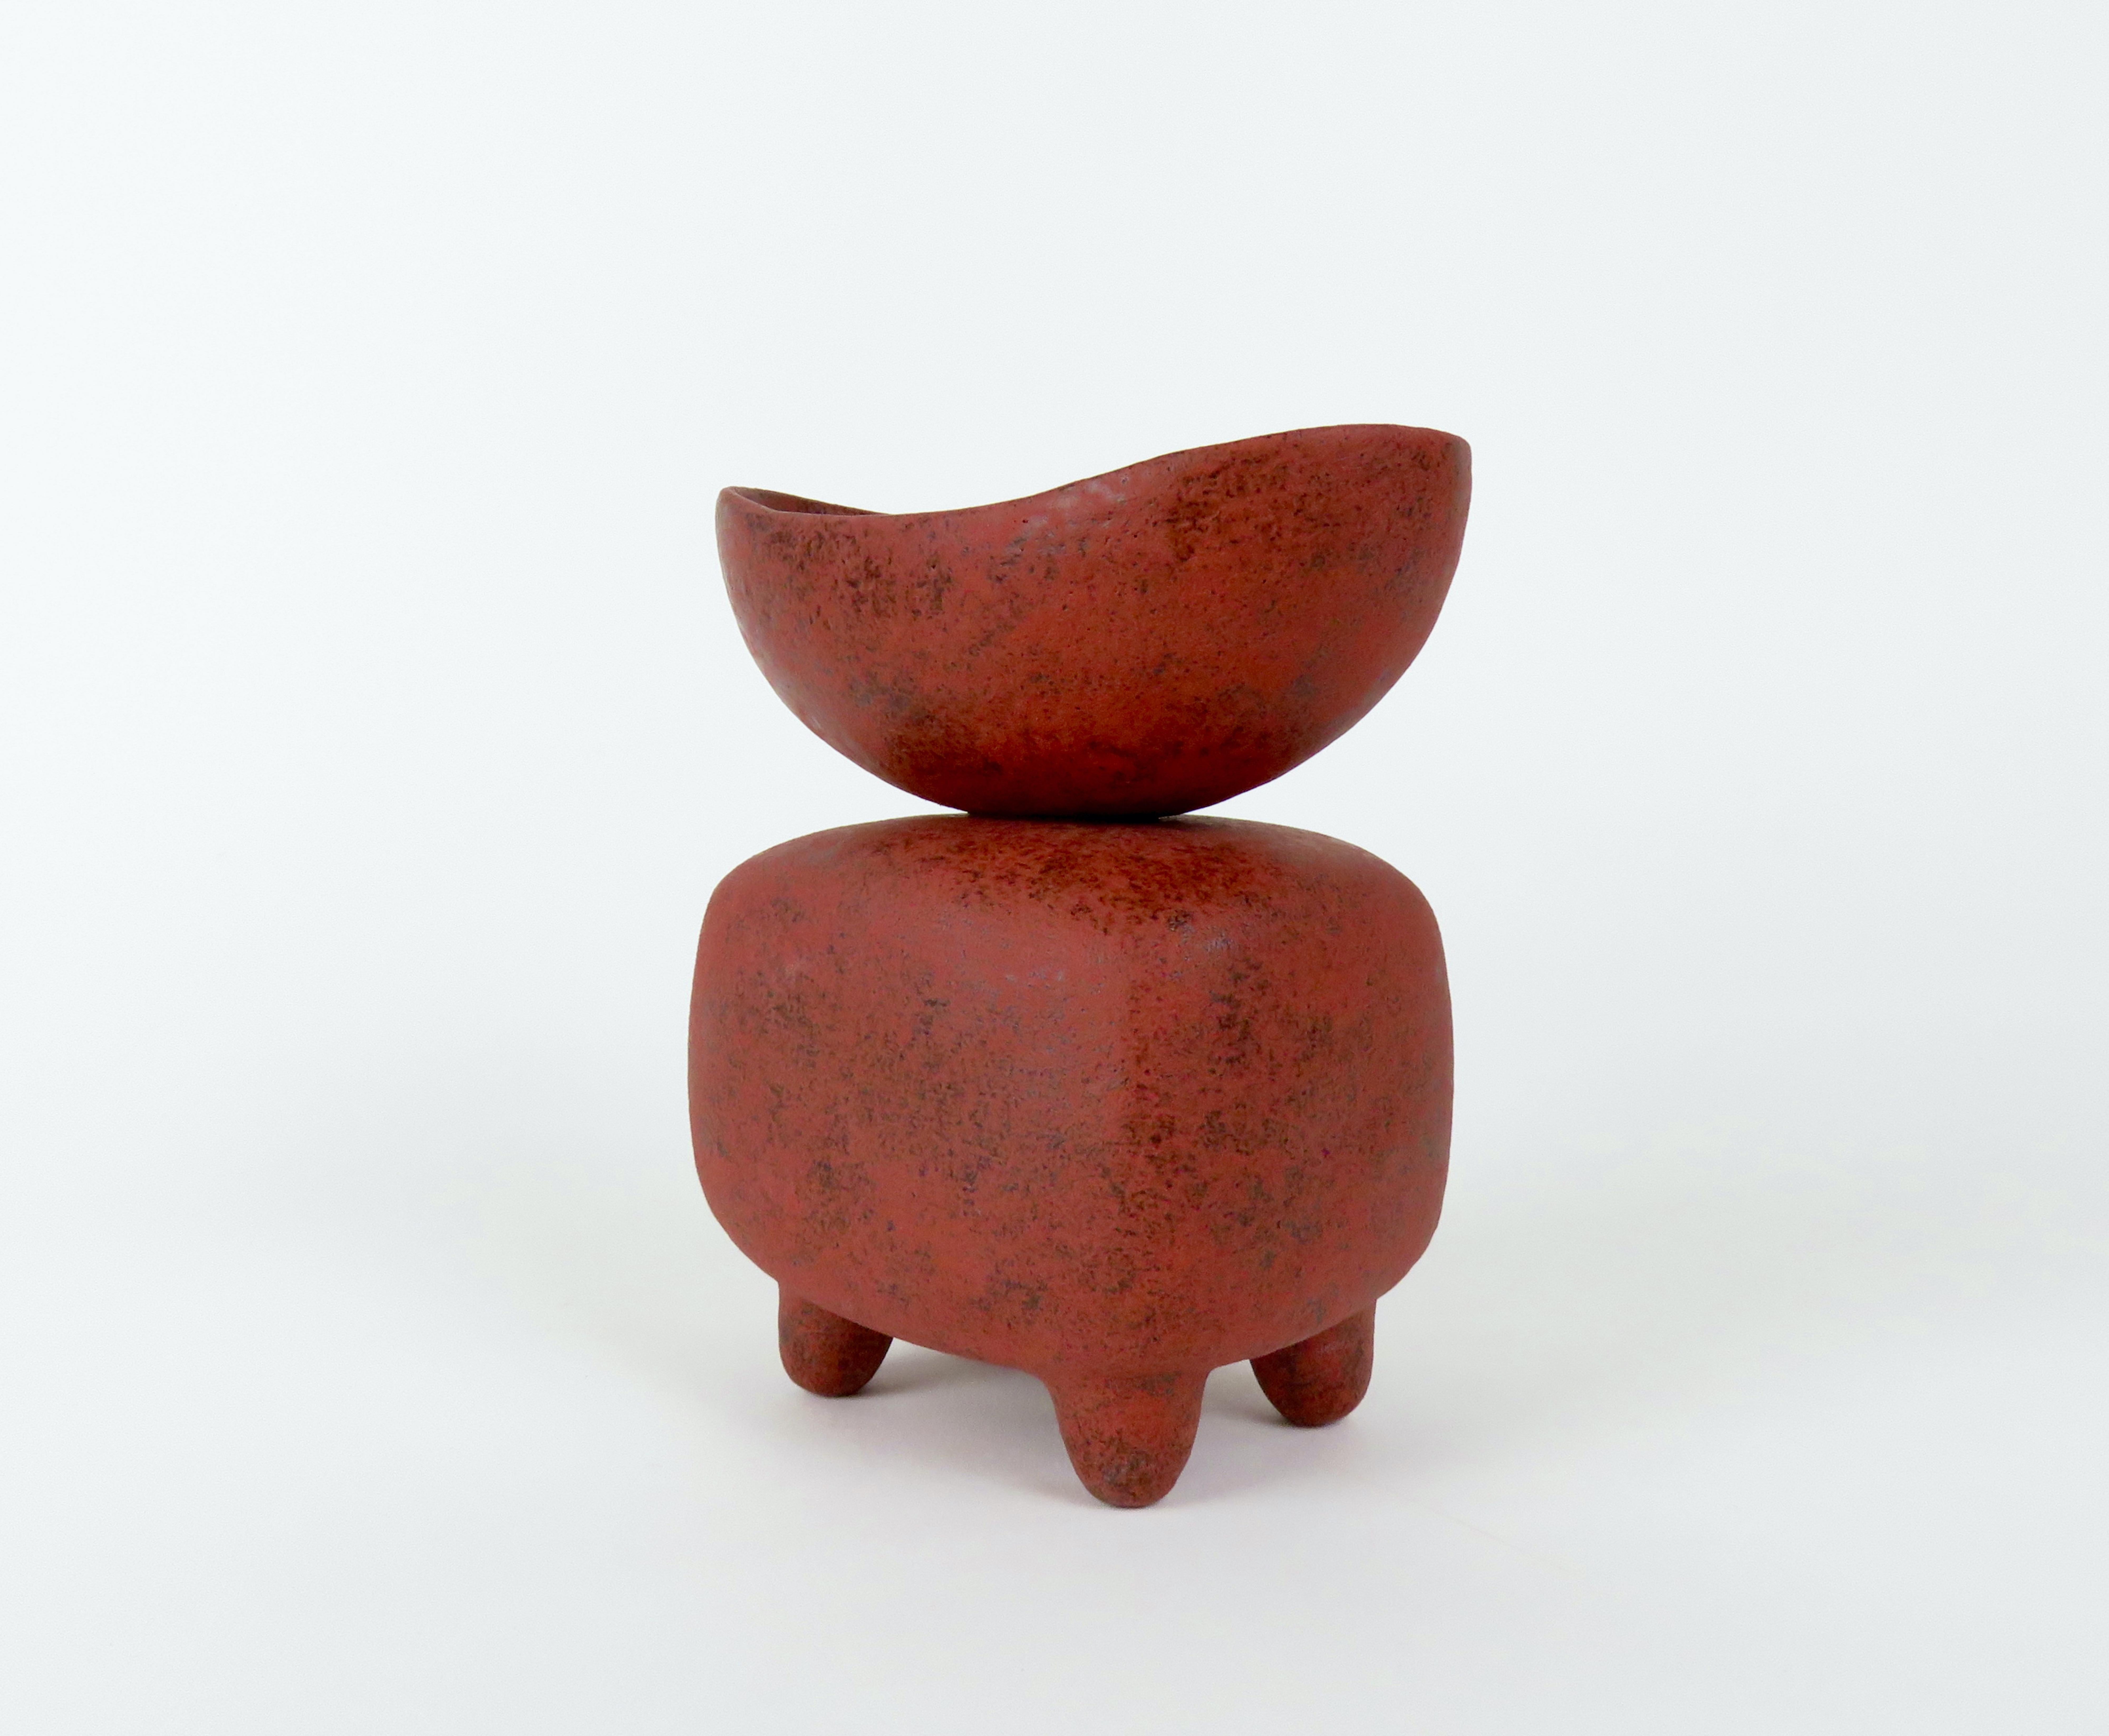 A small hand built ceramic sculpture in Mottled Red, the first piece in this color. The process began with a dark brown clay body and Inspiration. In regal, holy or ritual offerings, a cup or chalice is often used during the ceremony. Here the cup